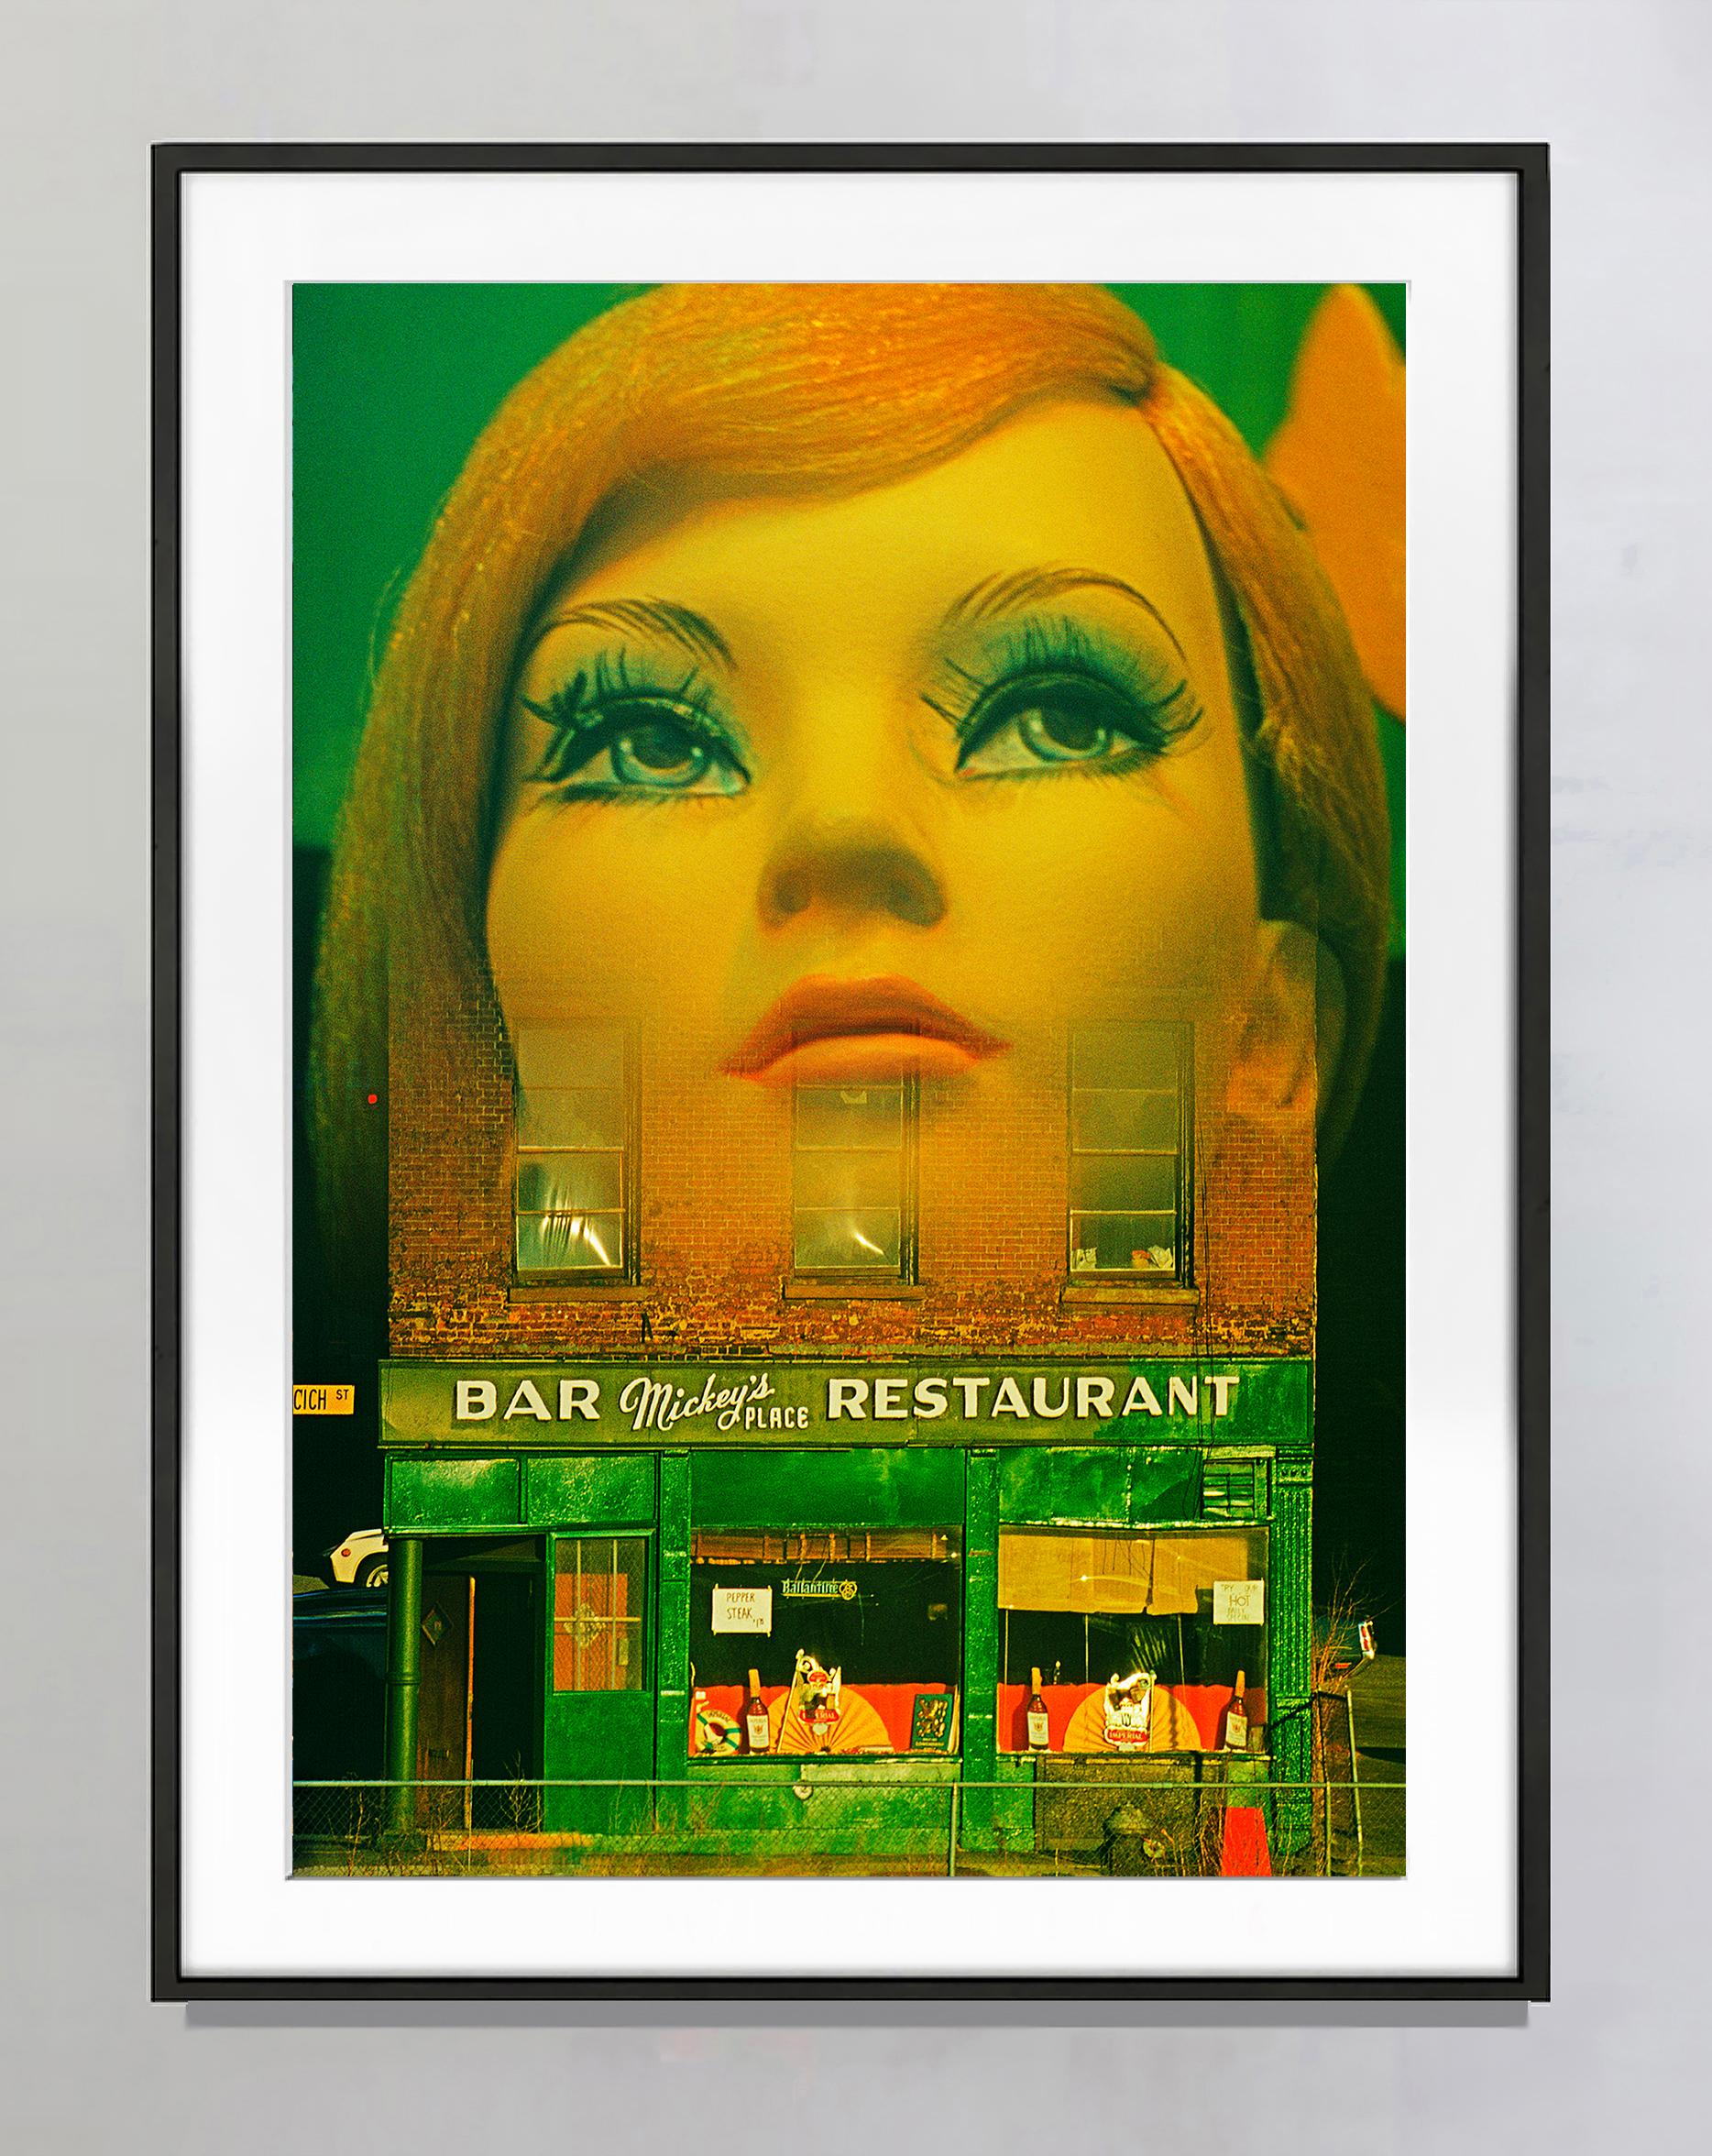 Two Facades  - Old New York Bar with Surreal  Mid-Century Mannequin Face - Photograph by Mitchell Funk